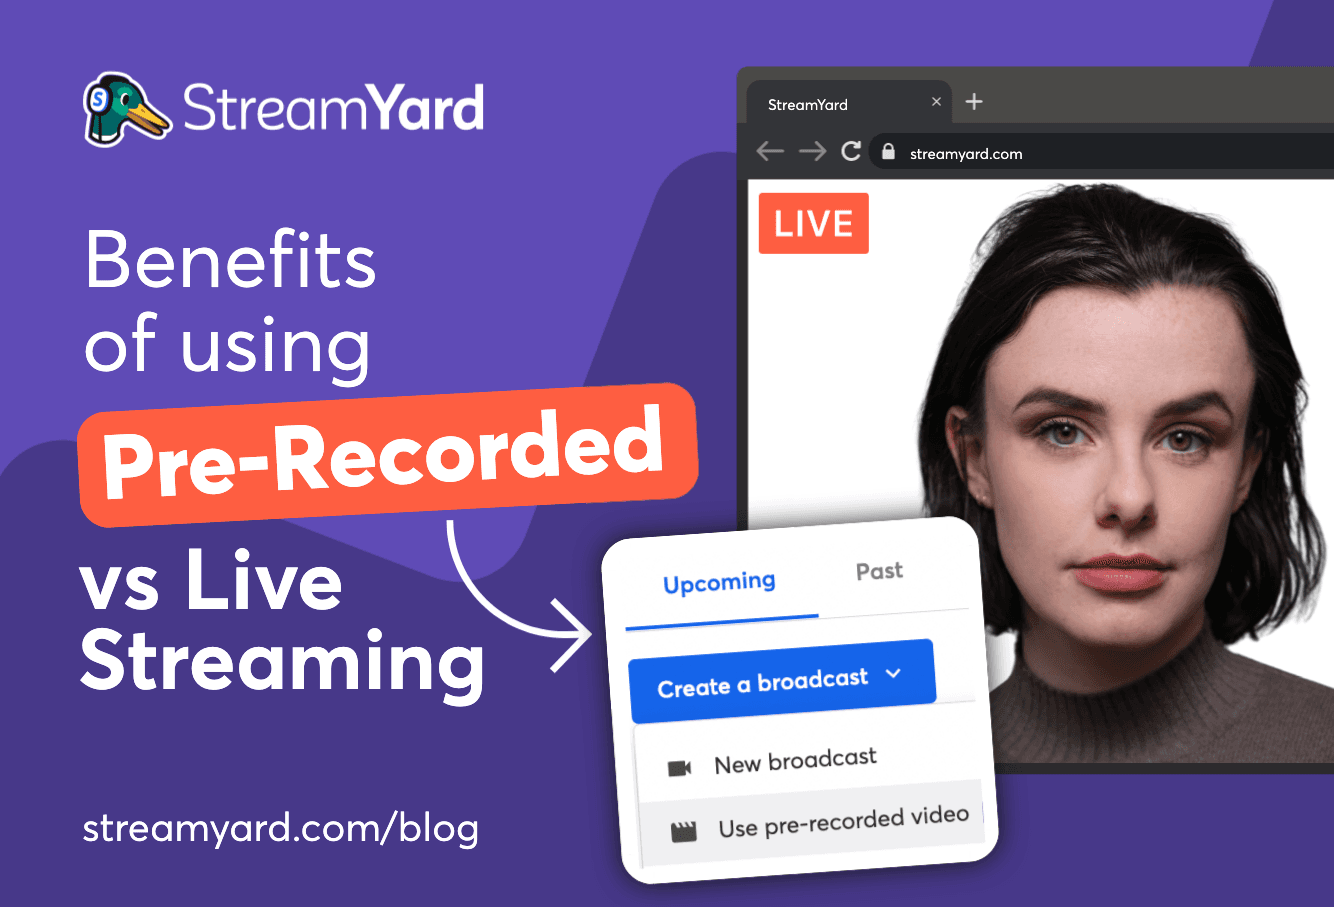 Find out how to bring pre-recorded streaming into your digital content mix to maintain live stream consistency with your viewers.